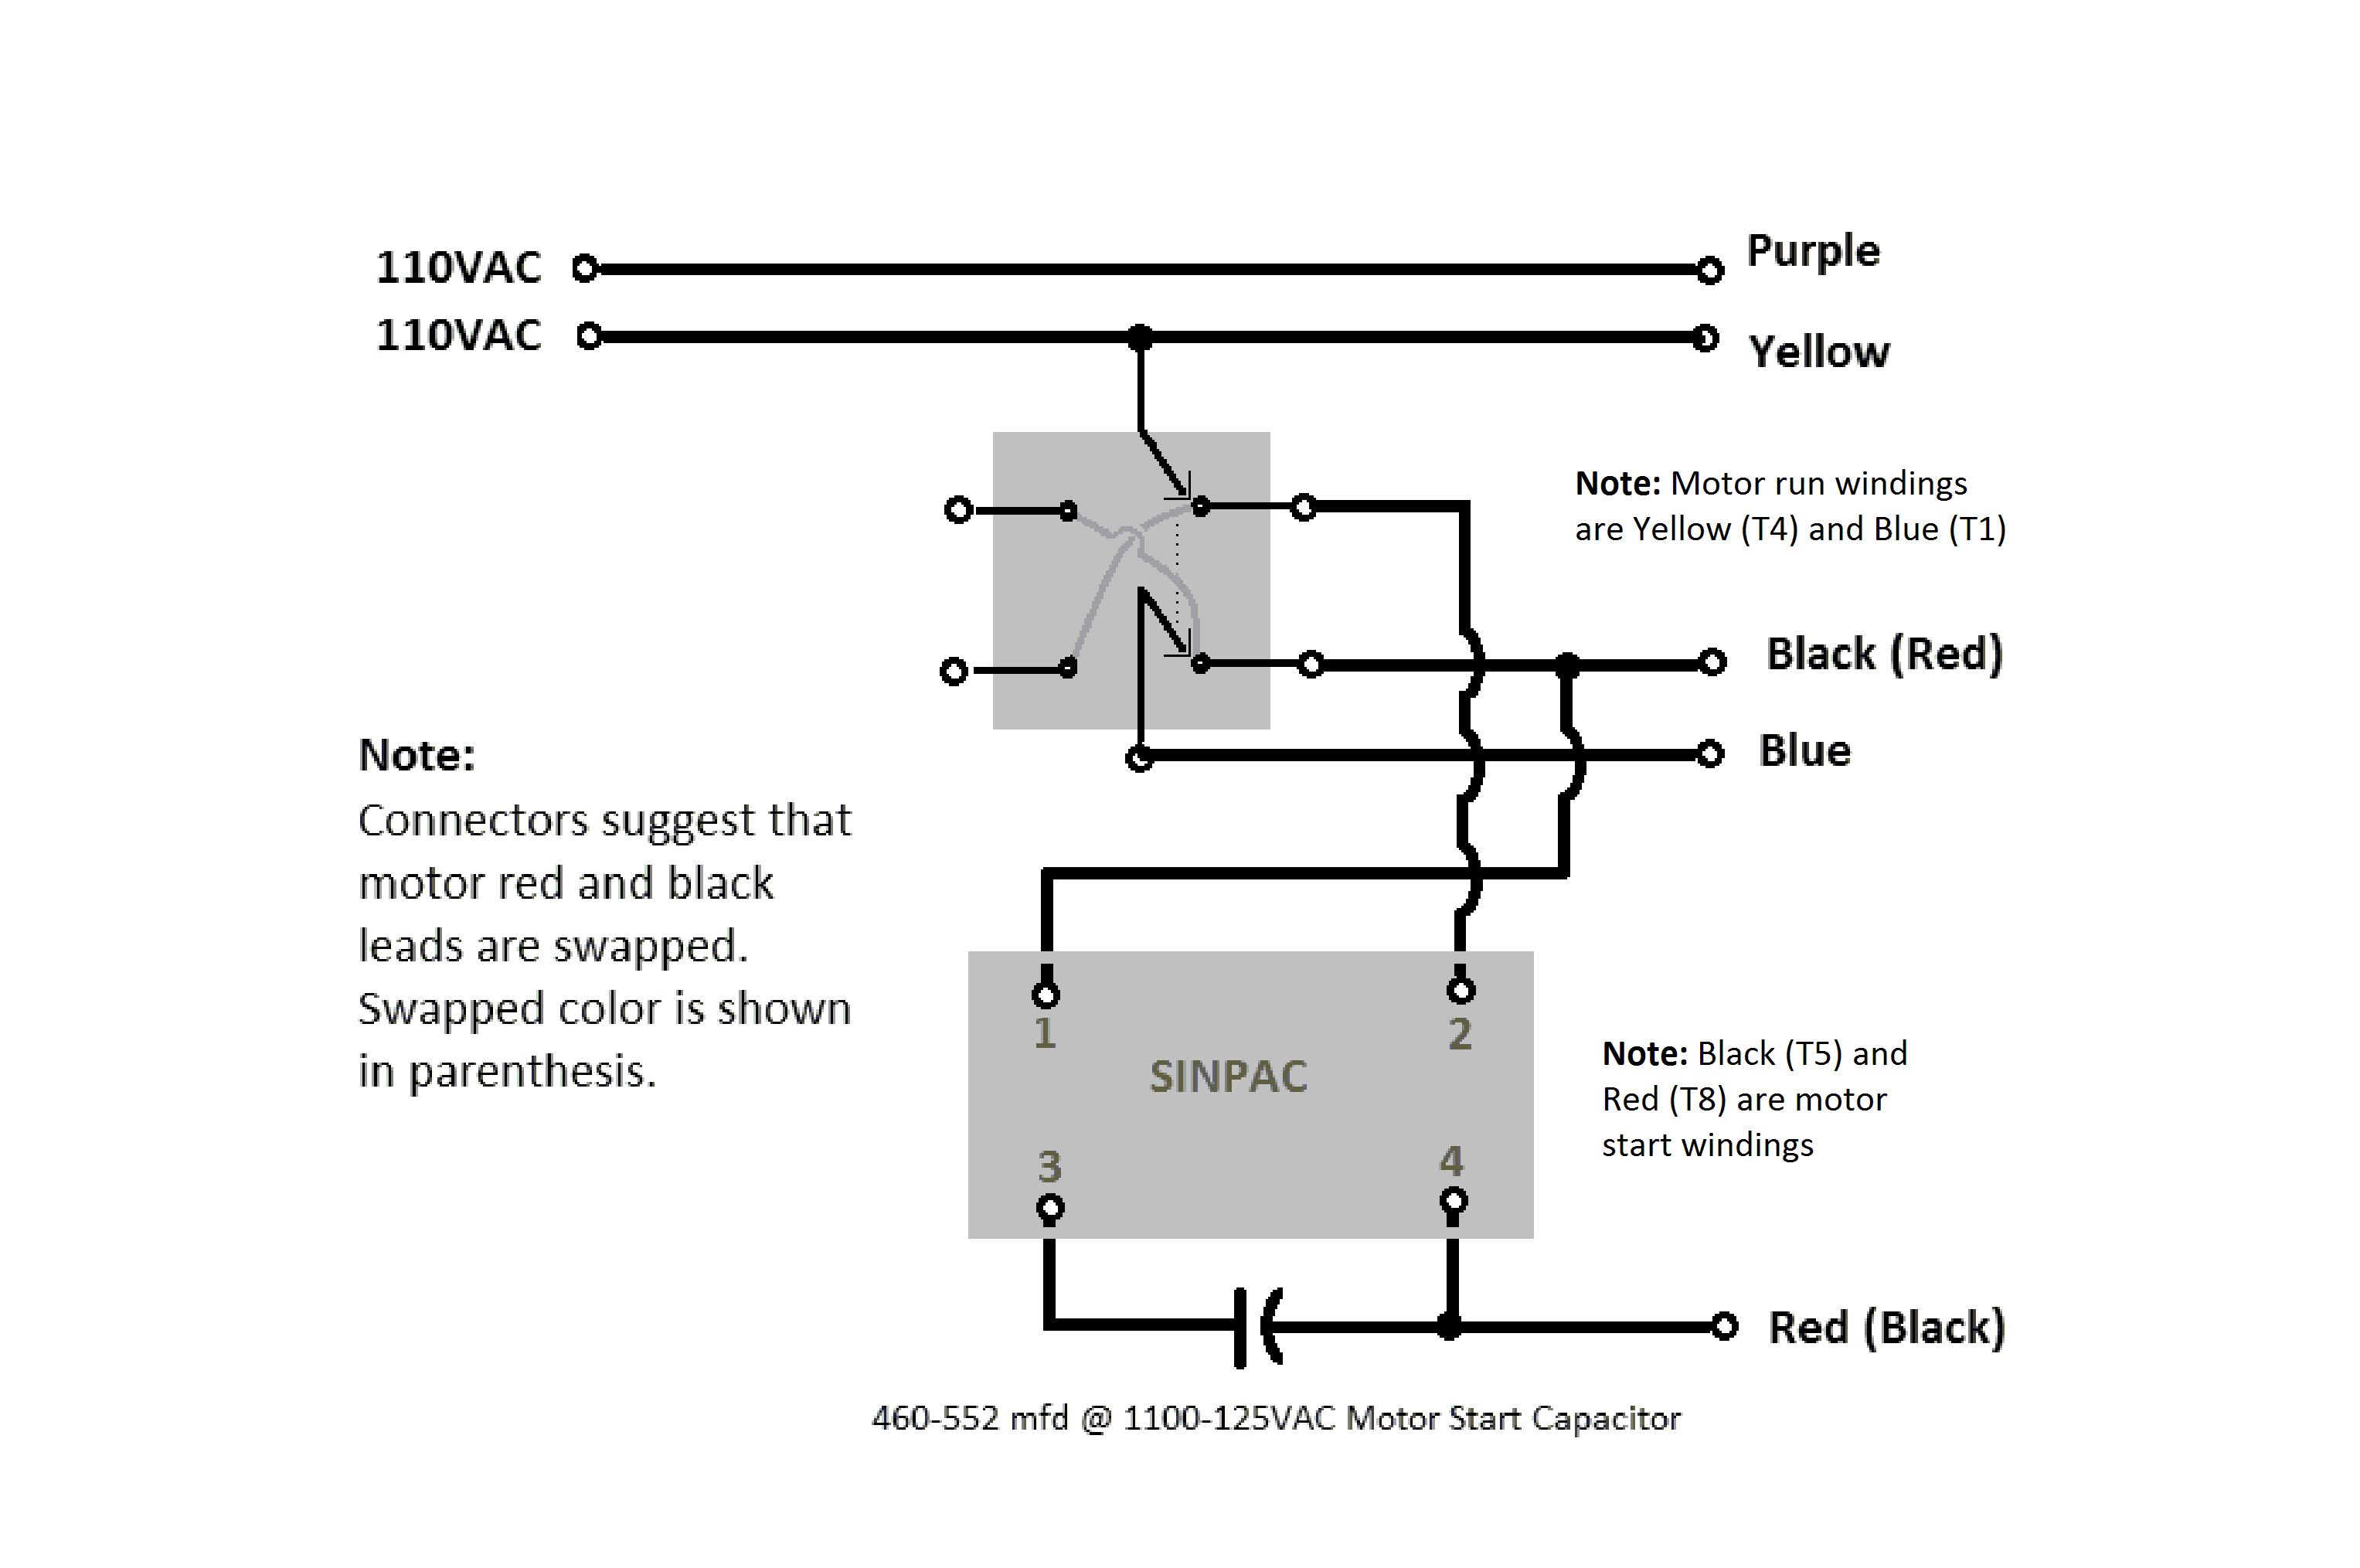 Schematic of the external wiring requirements posted on the motor label